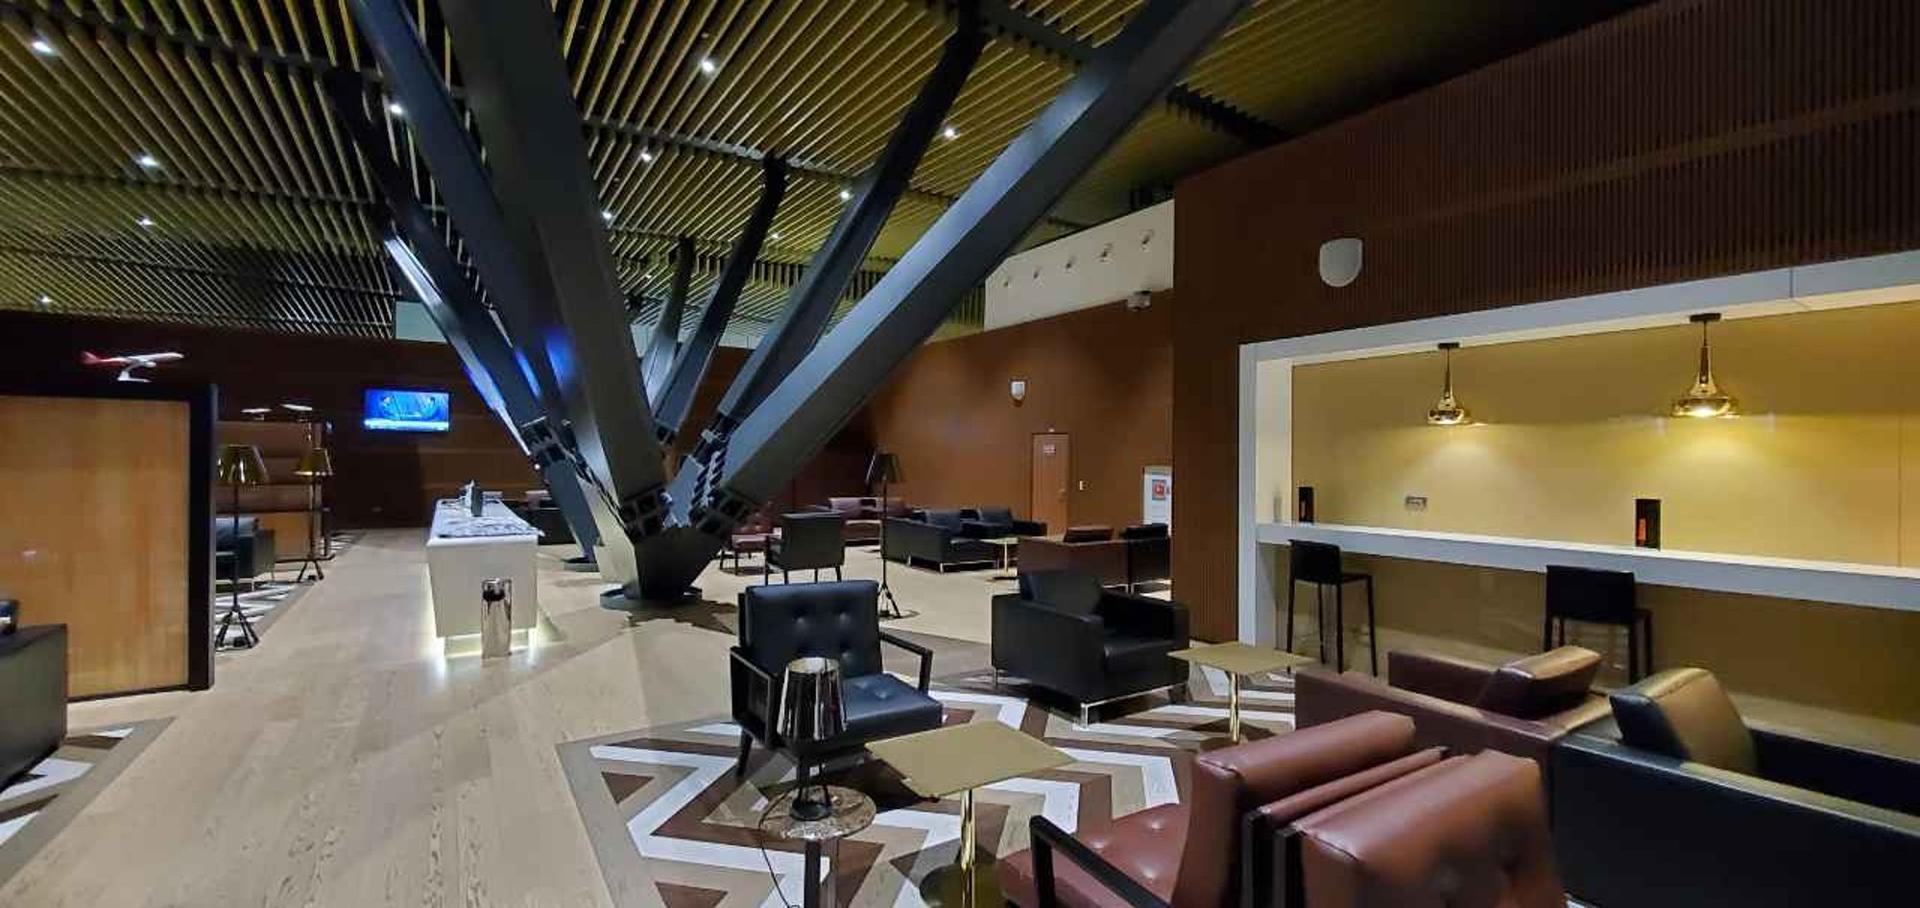 Business Class Lounge image 2 of 3